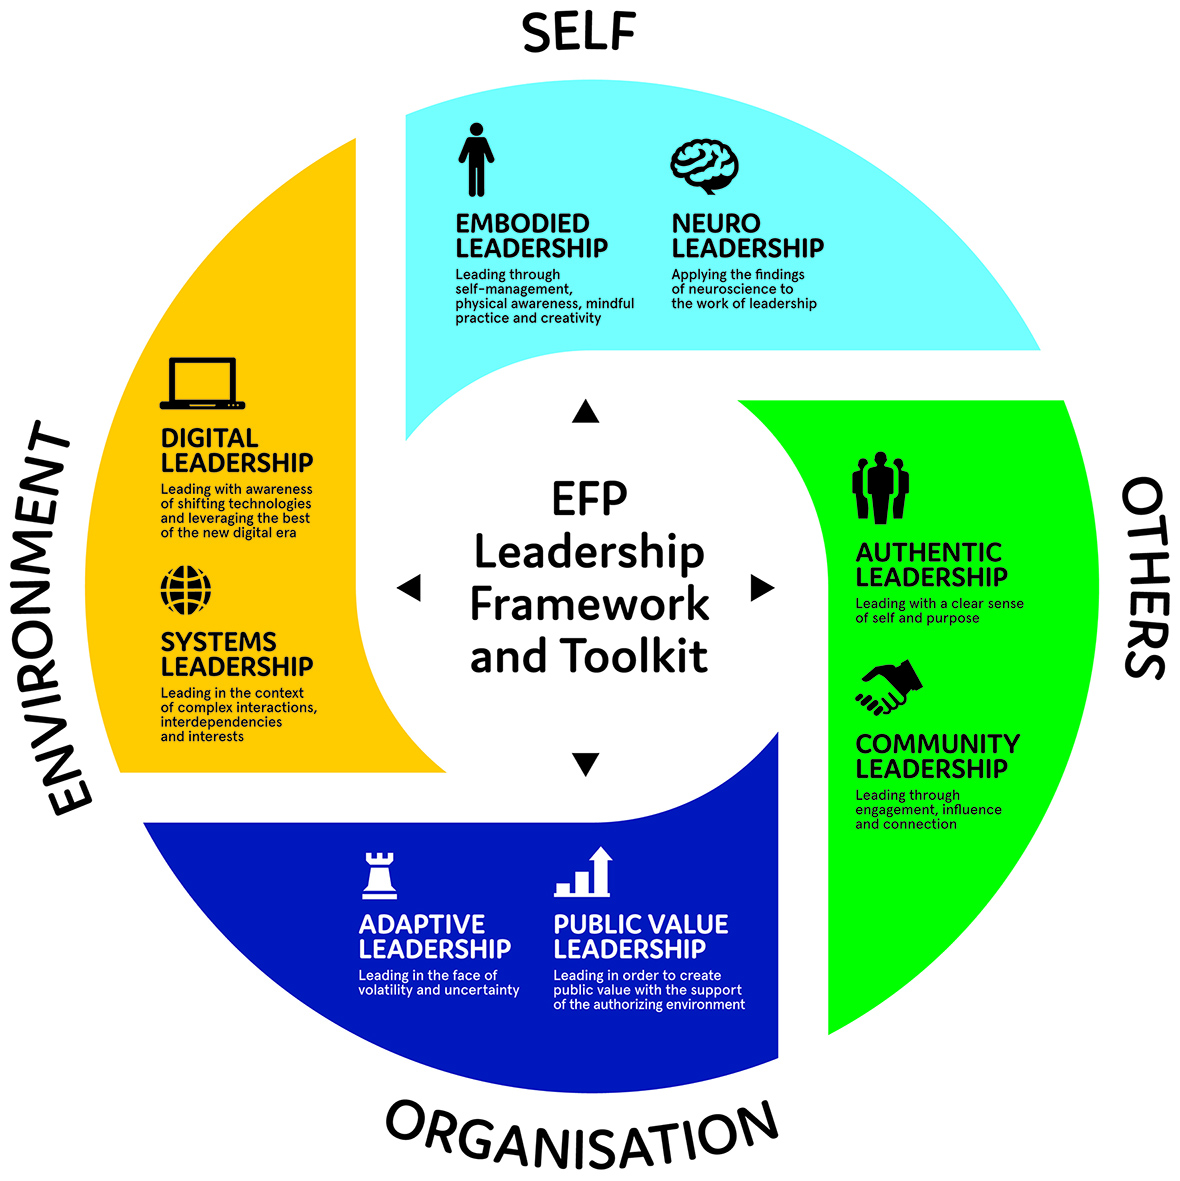 A circular image with four themes on each side (moving clockwise) – Self, Others, Organisation and Environment. Self, on the top, consists of Embodied Leadership and Neuro Leadership. Embodied Leadership is leading through self -management, physical awareness, mindful practice and creativity. Neuro Leadership is applying the findings of neuroscience to the work of leadership. Others, to the right, consists of Authentic Leadership and Community Leadership. Authentic Leadership is leading with a clear sense of self and purpose. Community Leadership is leading through engagement, influence and connection. Organisation, at the bottom, consists of Adaptive Leadership and Public Value Leadership. Adaptive Leadership is leading in the face of volatility and uncertainty. Public Value Leadership is leading in order to create public value with the support of the authorising environment. Environment, to the left, consists of Digital Leadership and Systems Leadership. Digital Leadership is leading with awareness of shifting technologies and leveraging the best of the new digital era. Systems Leadership is leading in the context of complex interactions, interdependencies and interests.